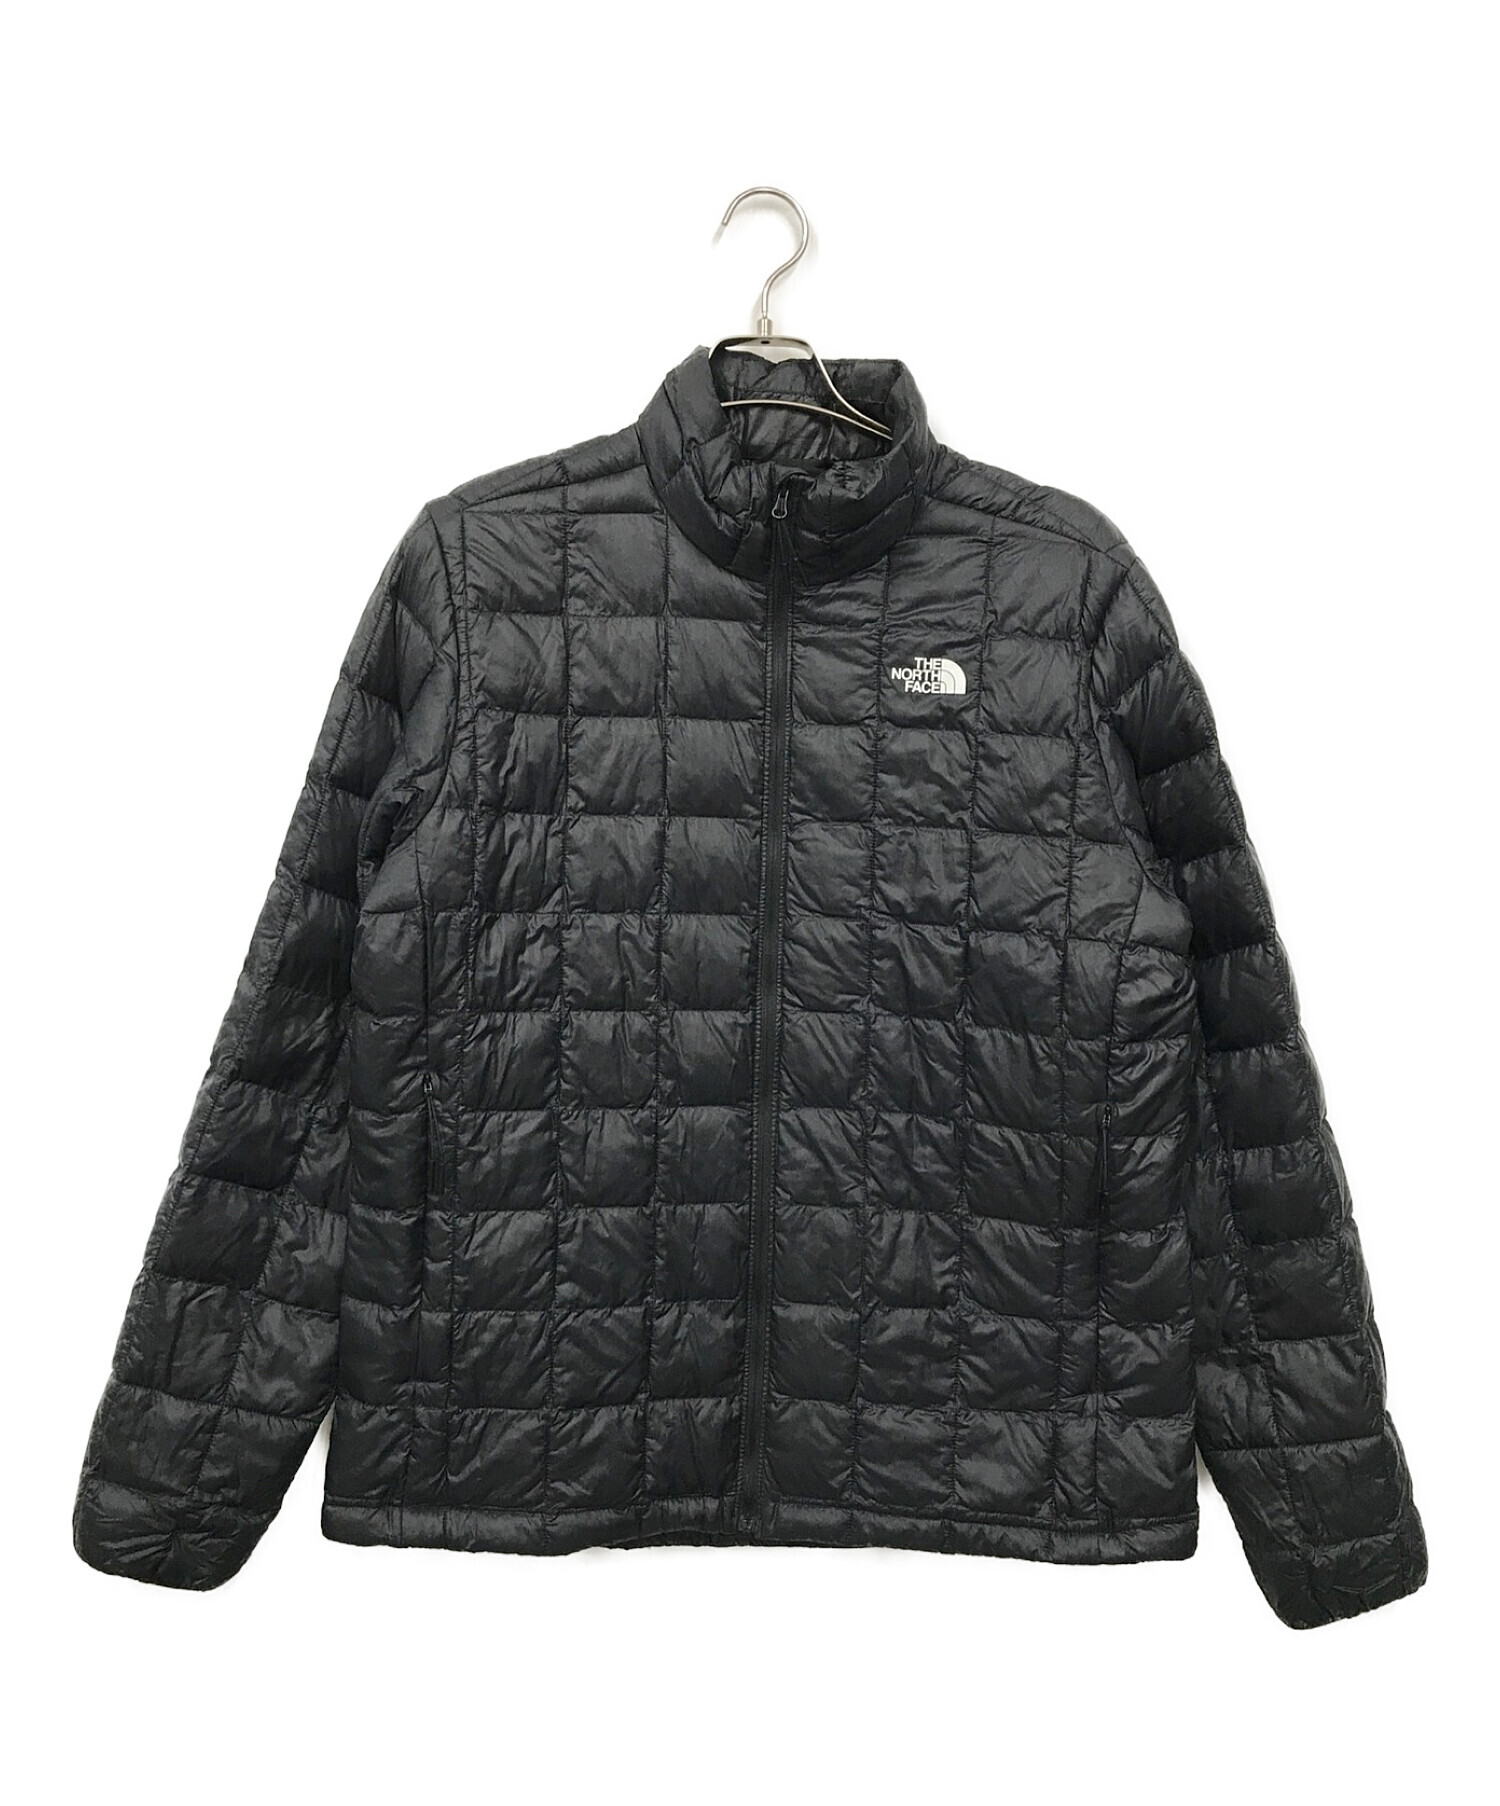 THE NORTH FACE  THERMOBALL JACKET サーモボール